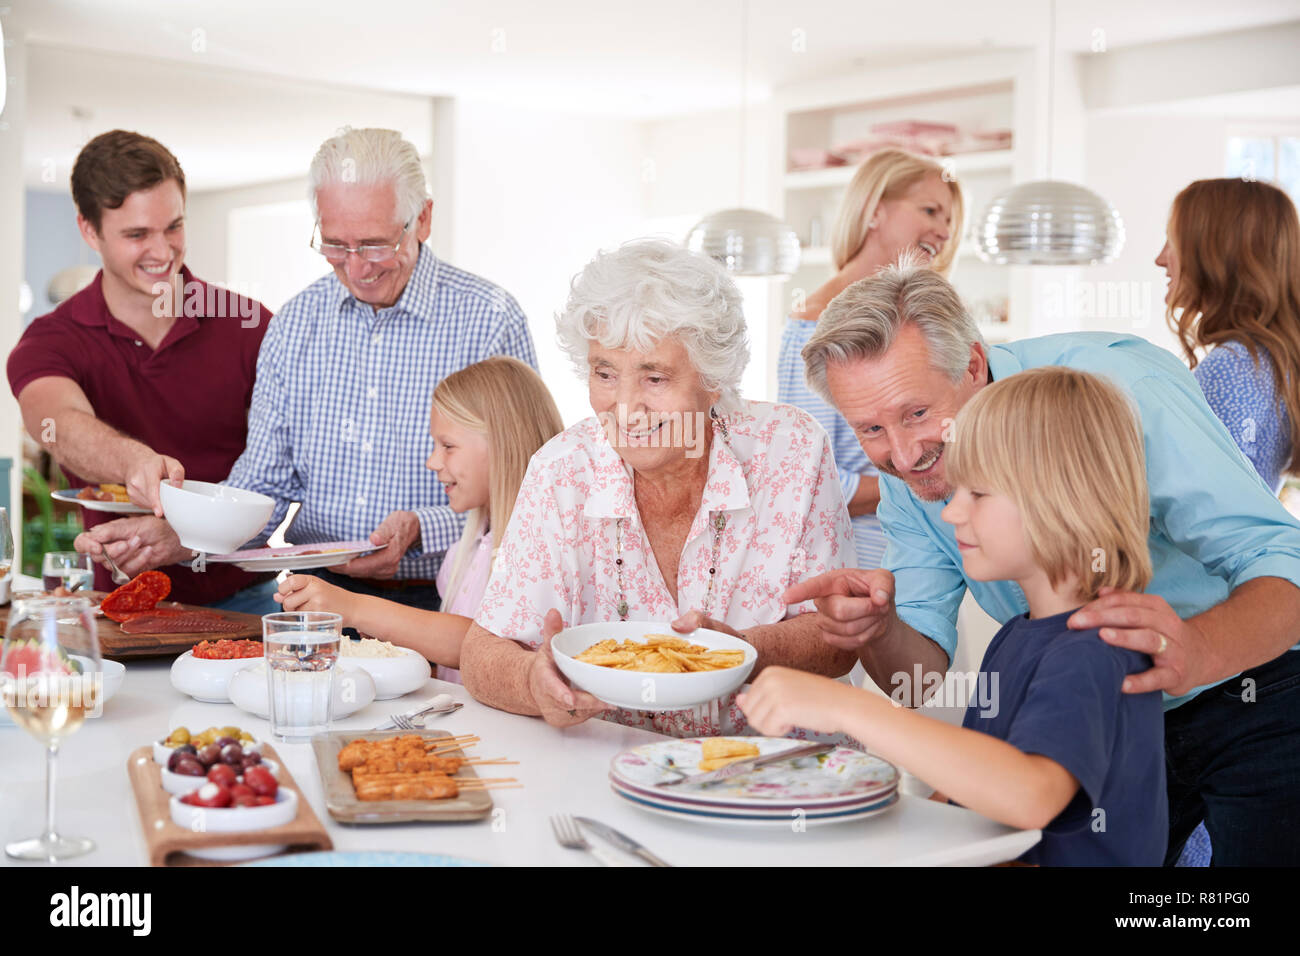 Multi-Generation Family And Friends Eating Food In Kitchen At Celebration Party Stock Photo